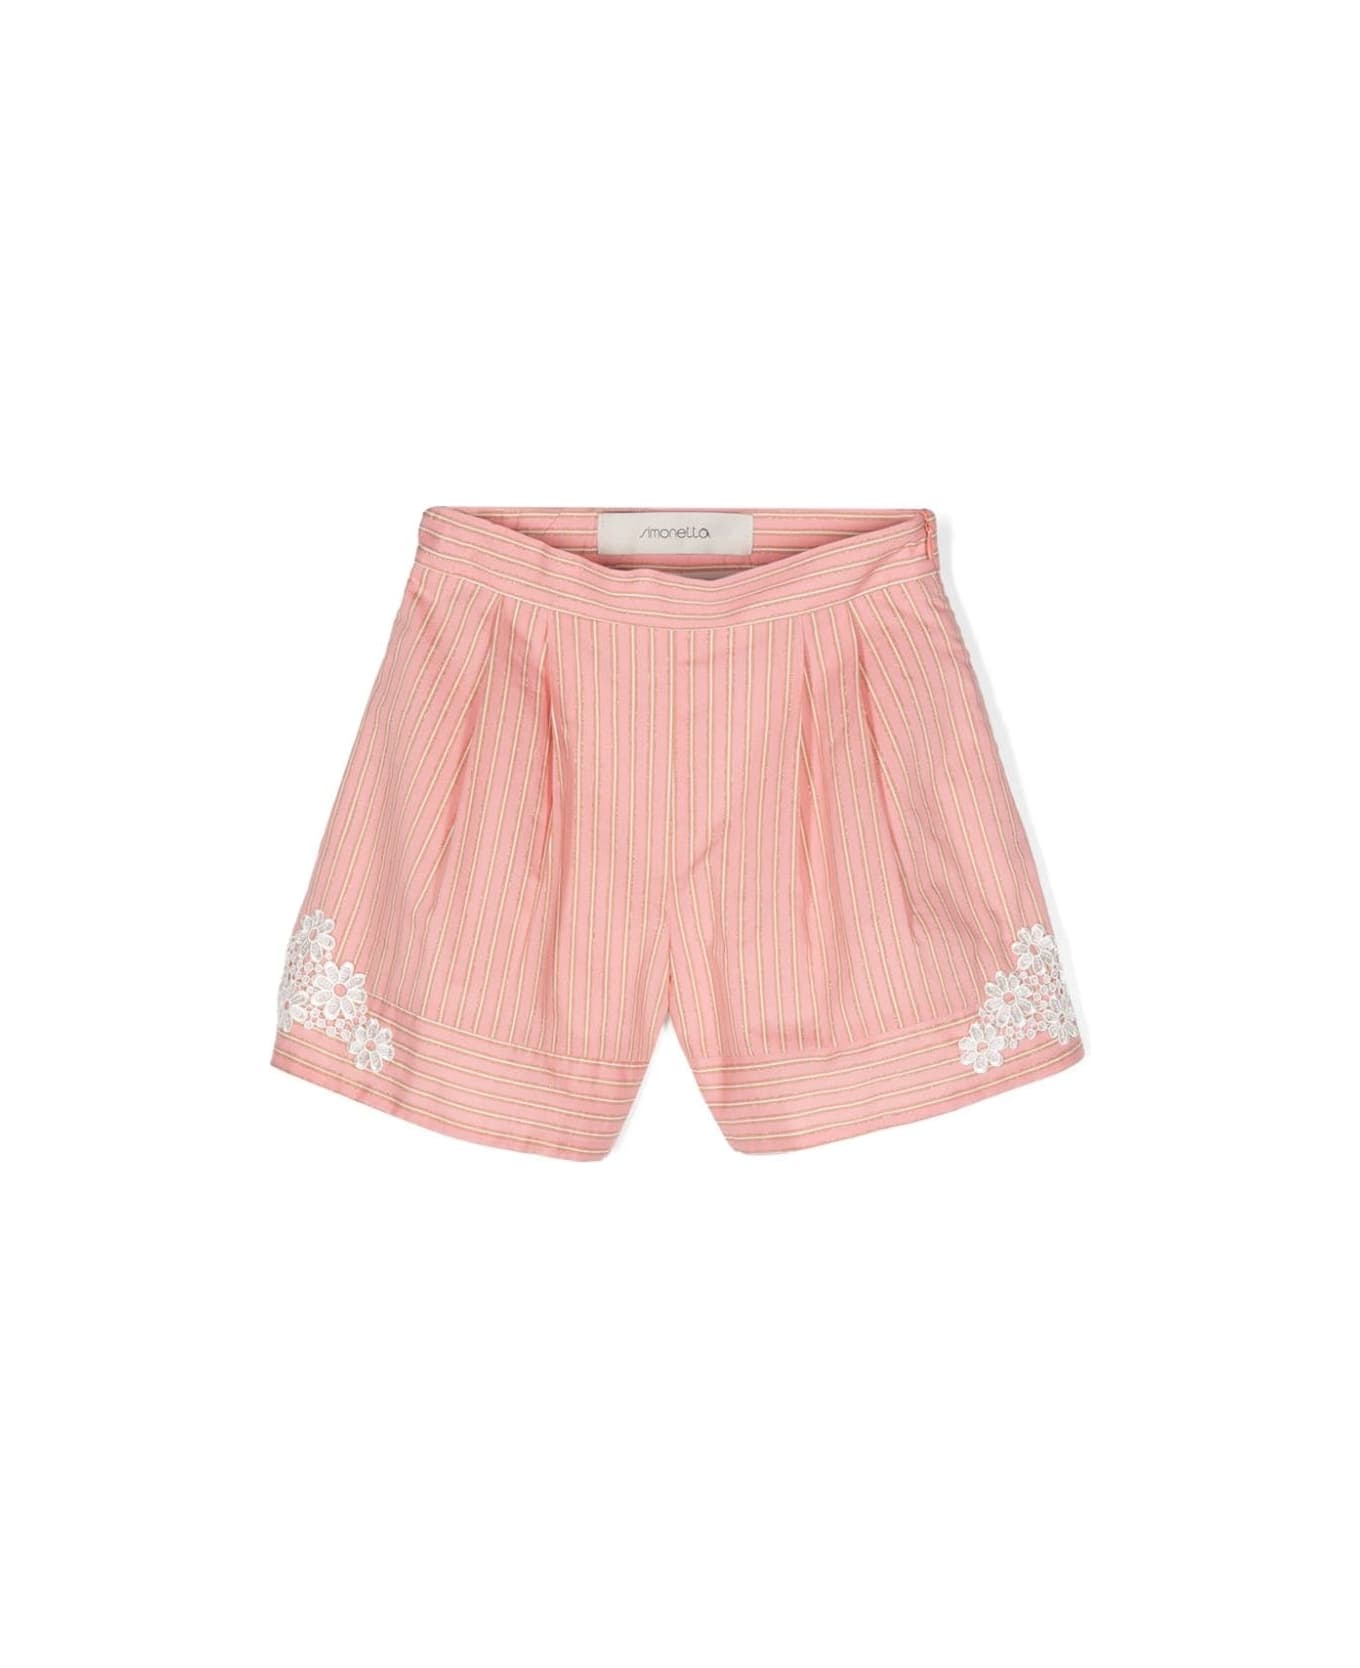 Simonetta Pink Lamé Striped Shorts With Lace - Pink ボトムス